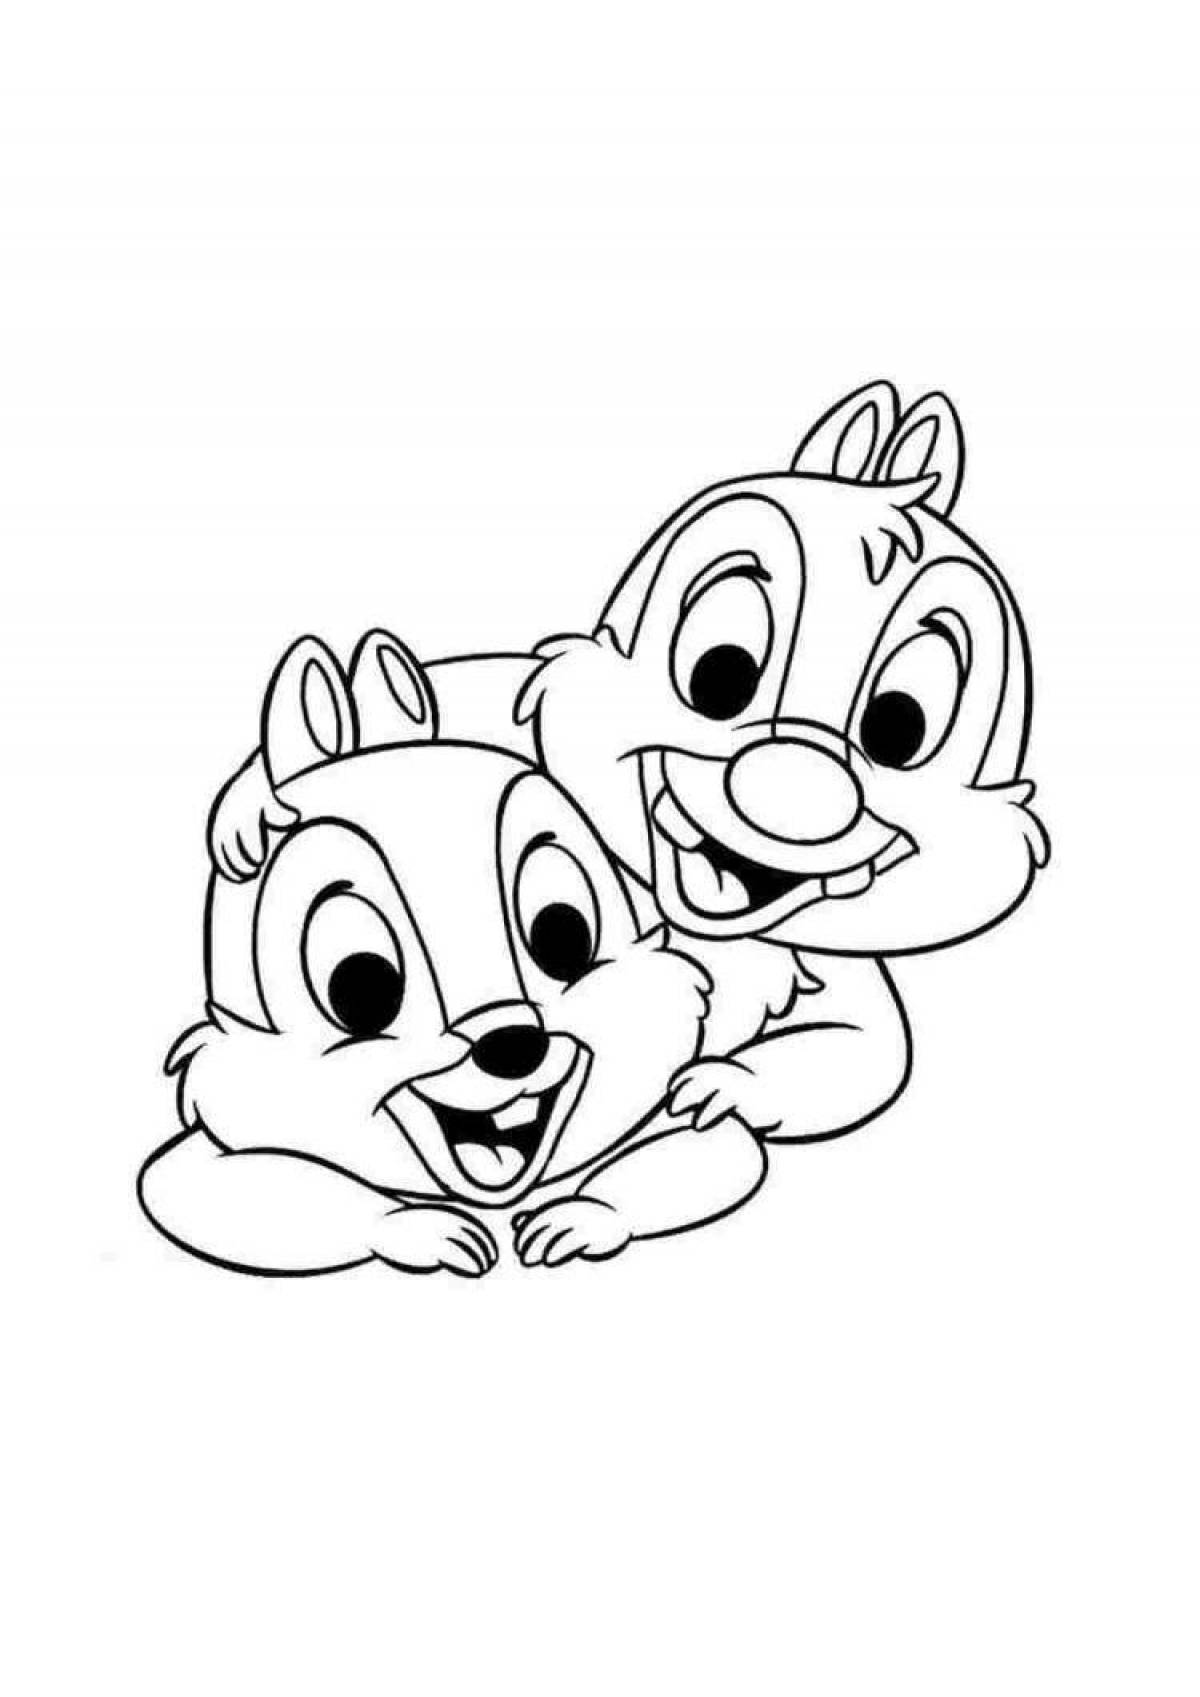 Dale's vibrant coloring page